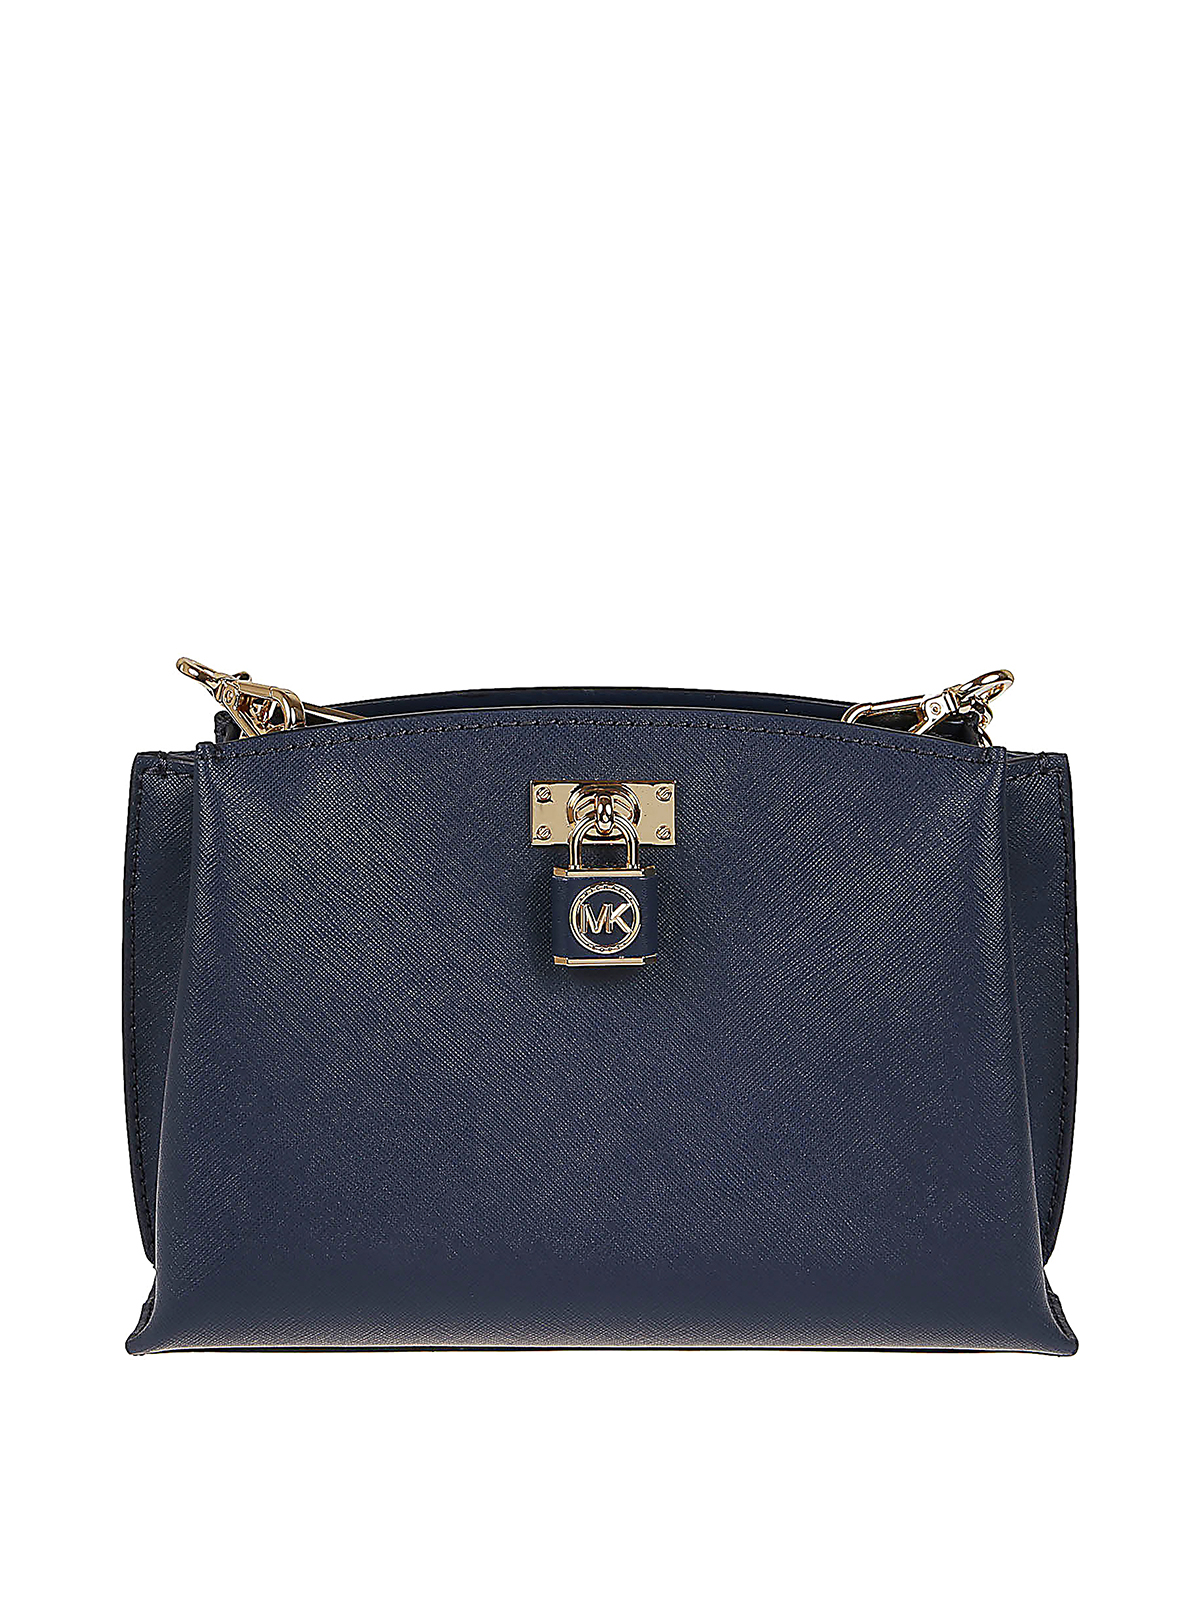 Michael Kors Saffiano Leather Bag In Blue